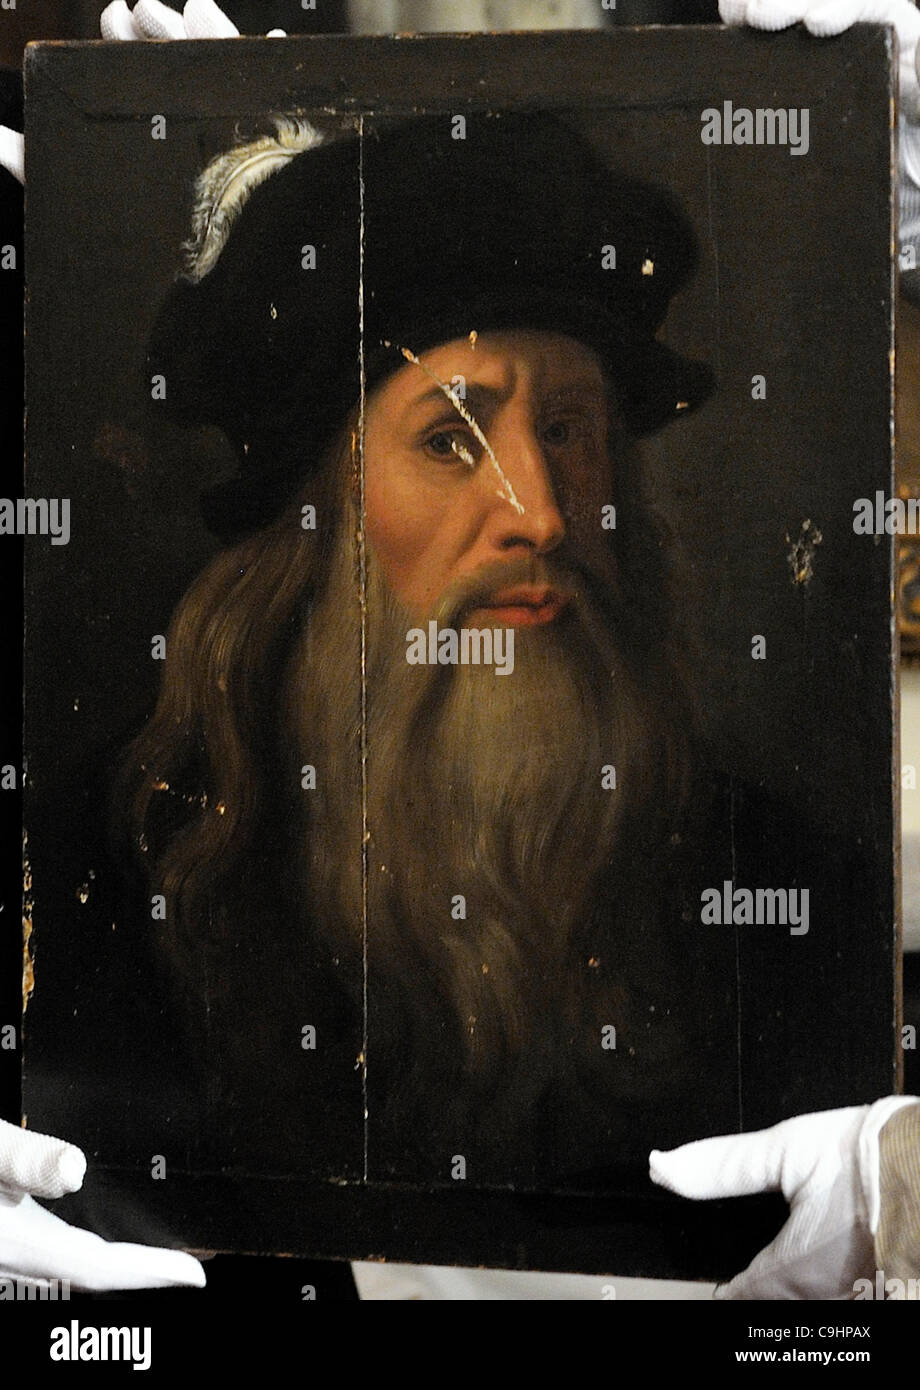 Newly found renaissance portrait of Leonardo da Vinci has been transfered to the Zbiroh Castle. Pictured in Zbiroh, the Czech Republic, on January 8, 2011 (CTK Photo/Petr Eret) Stock Photo